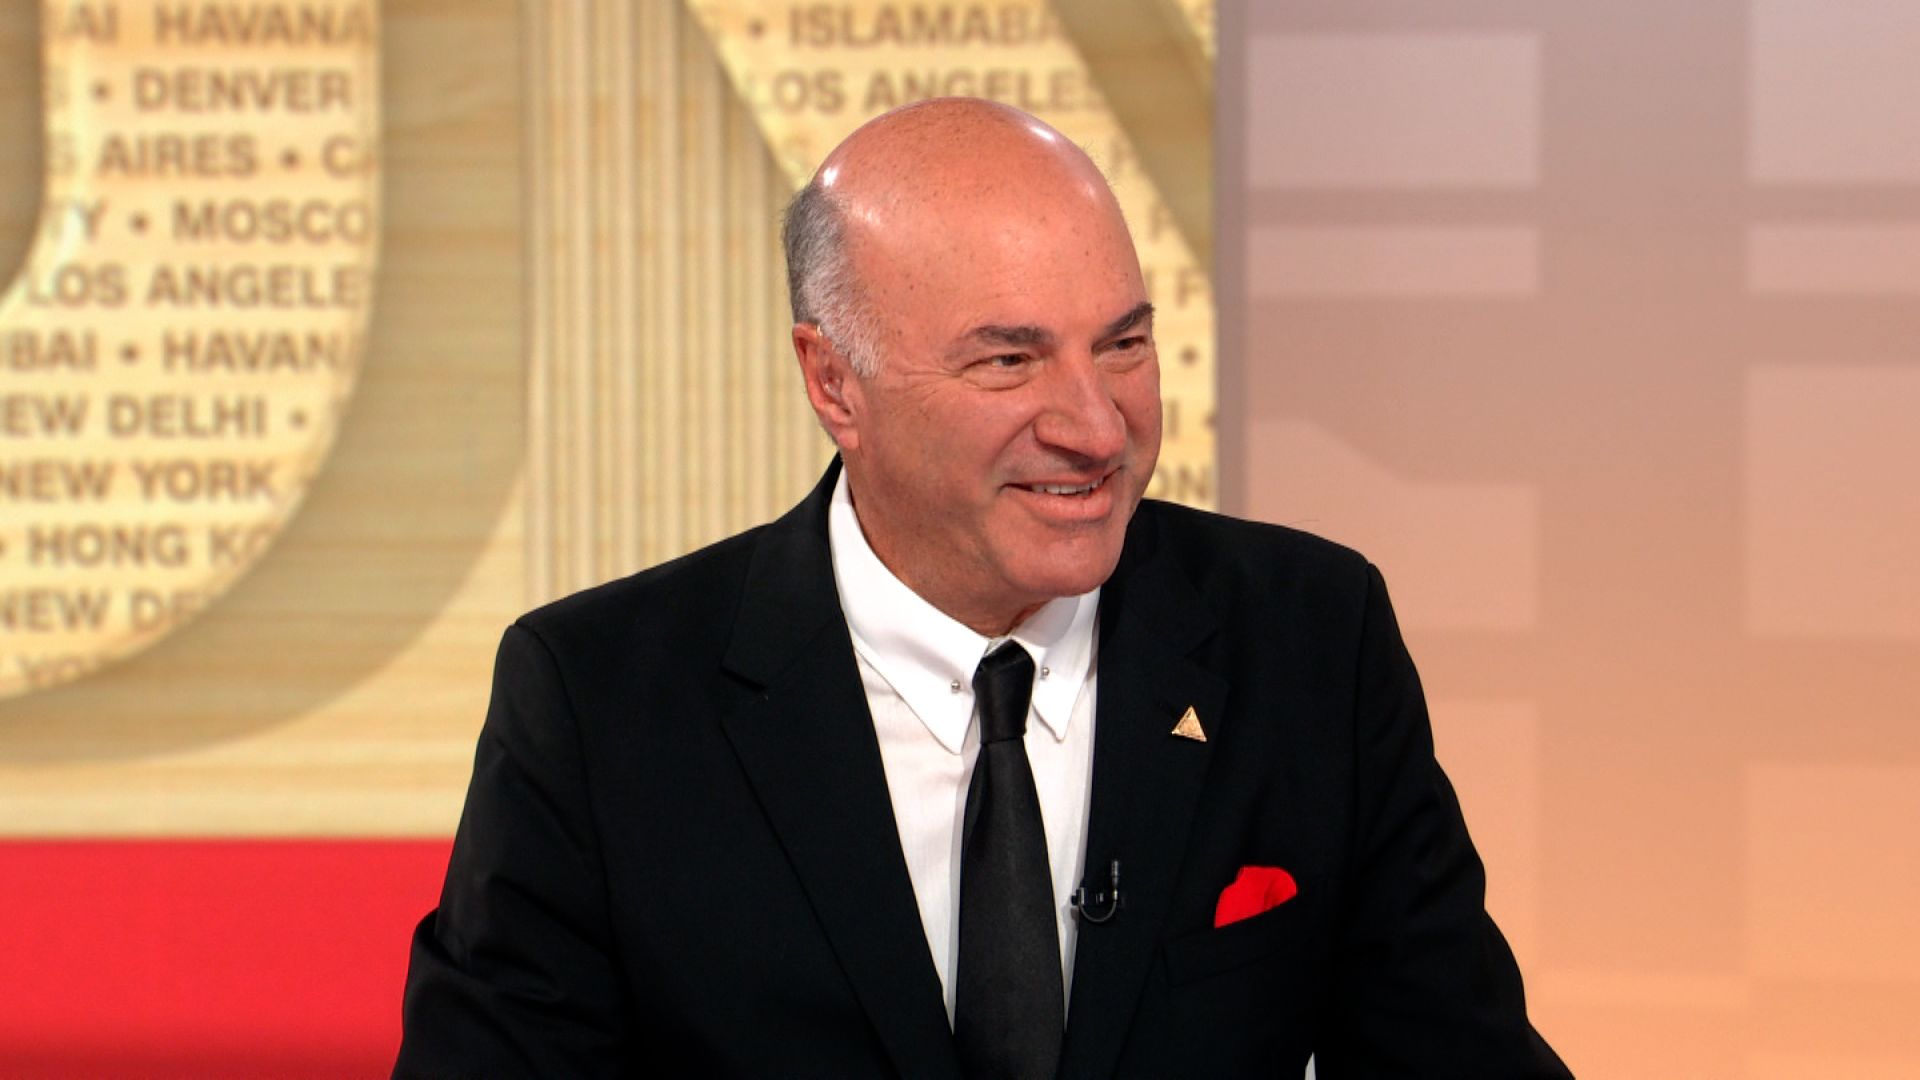 Kevin O'Leary and Le-Glue Strike A Deal on Shark Tank